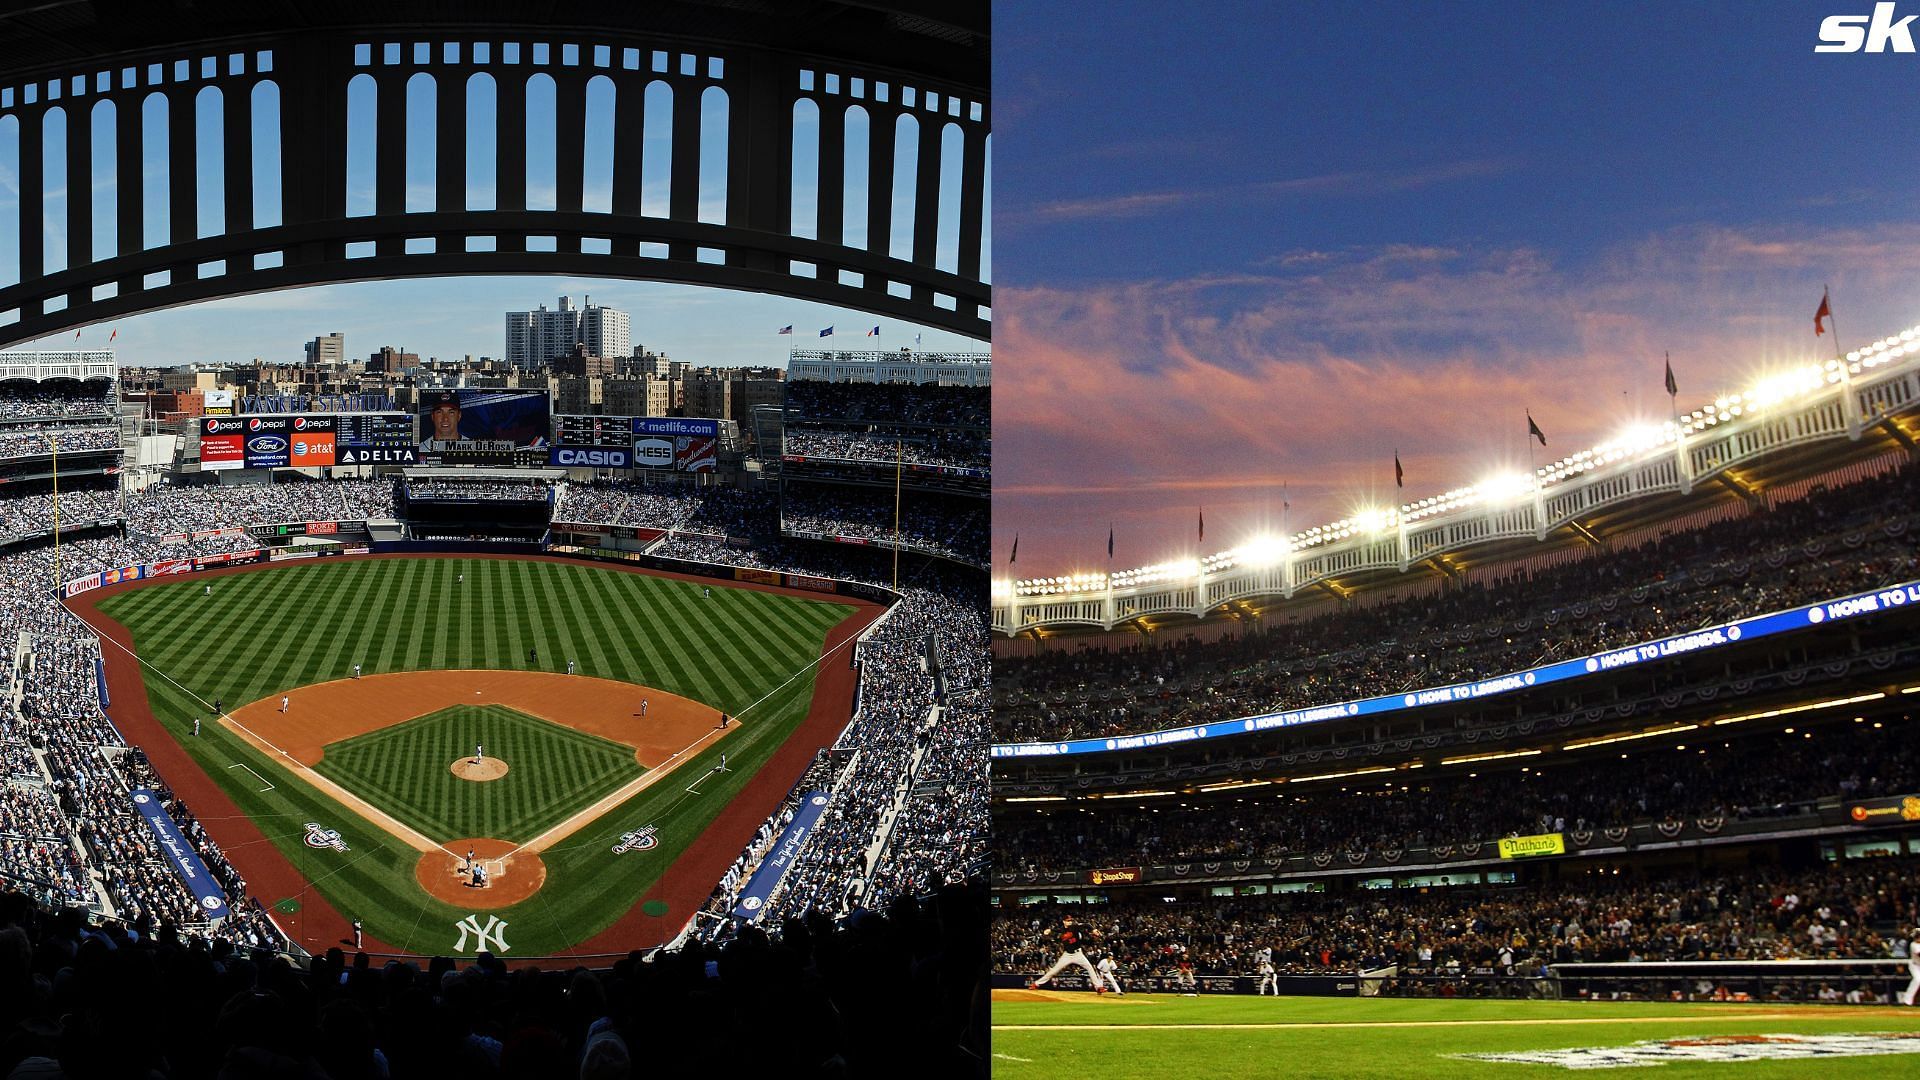 The New York Yankees faces the Baltimore Orioles in the 2012 ALDS at Yankee Stadium